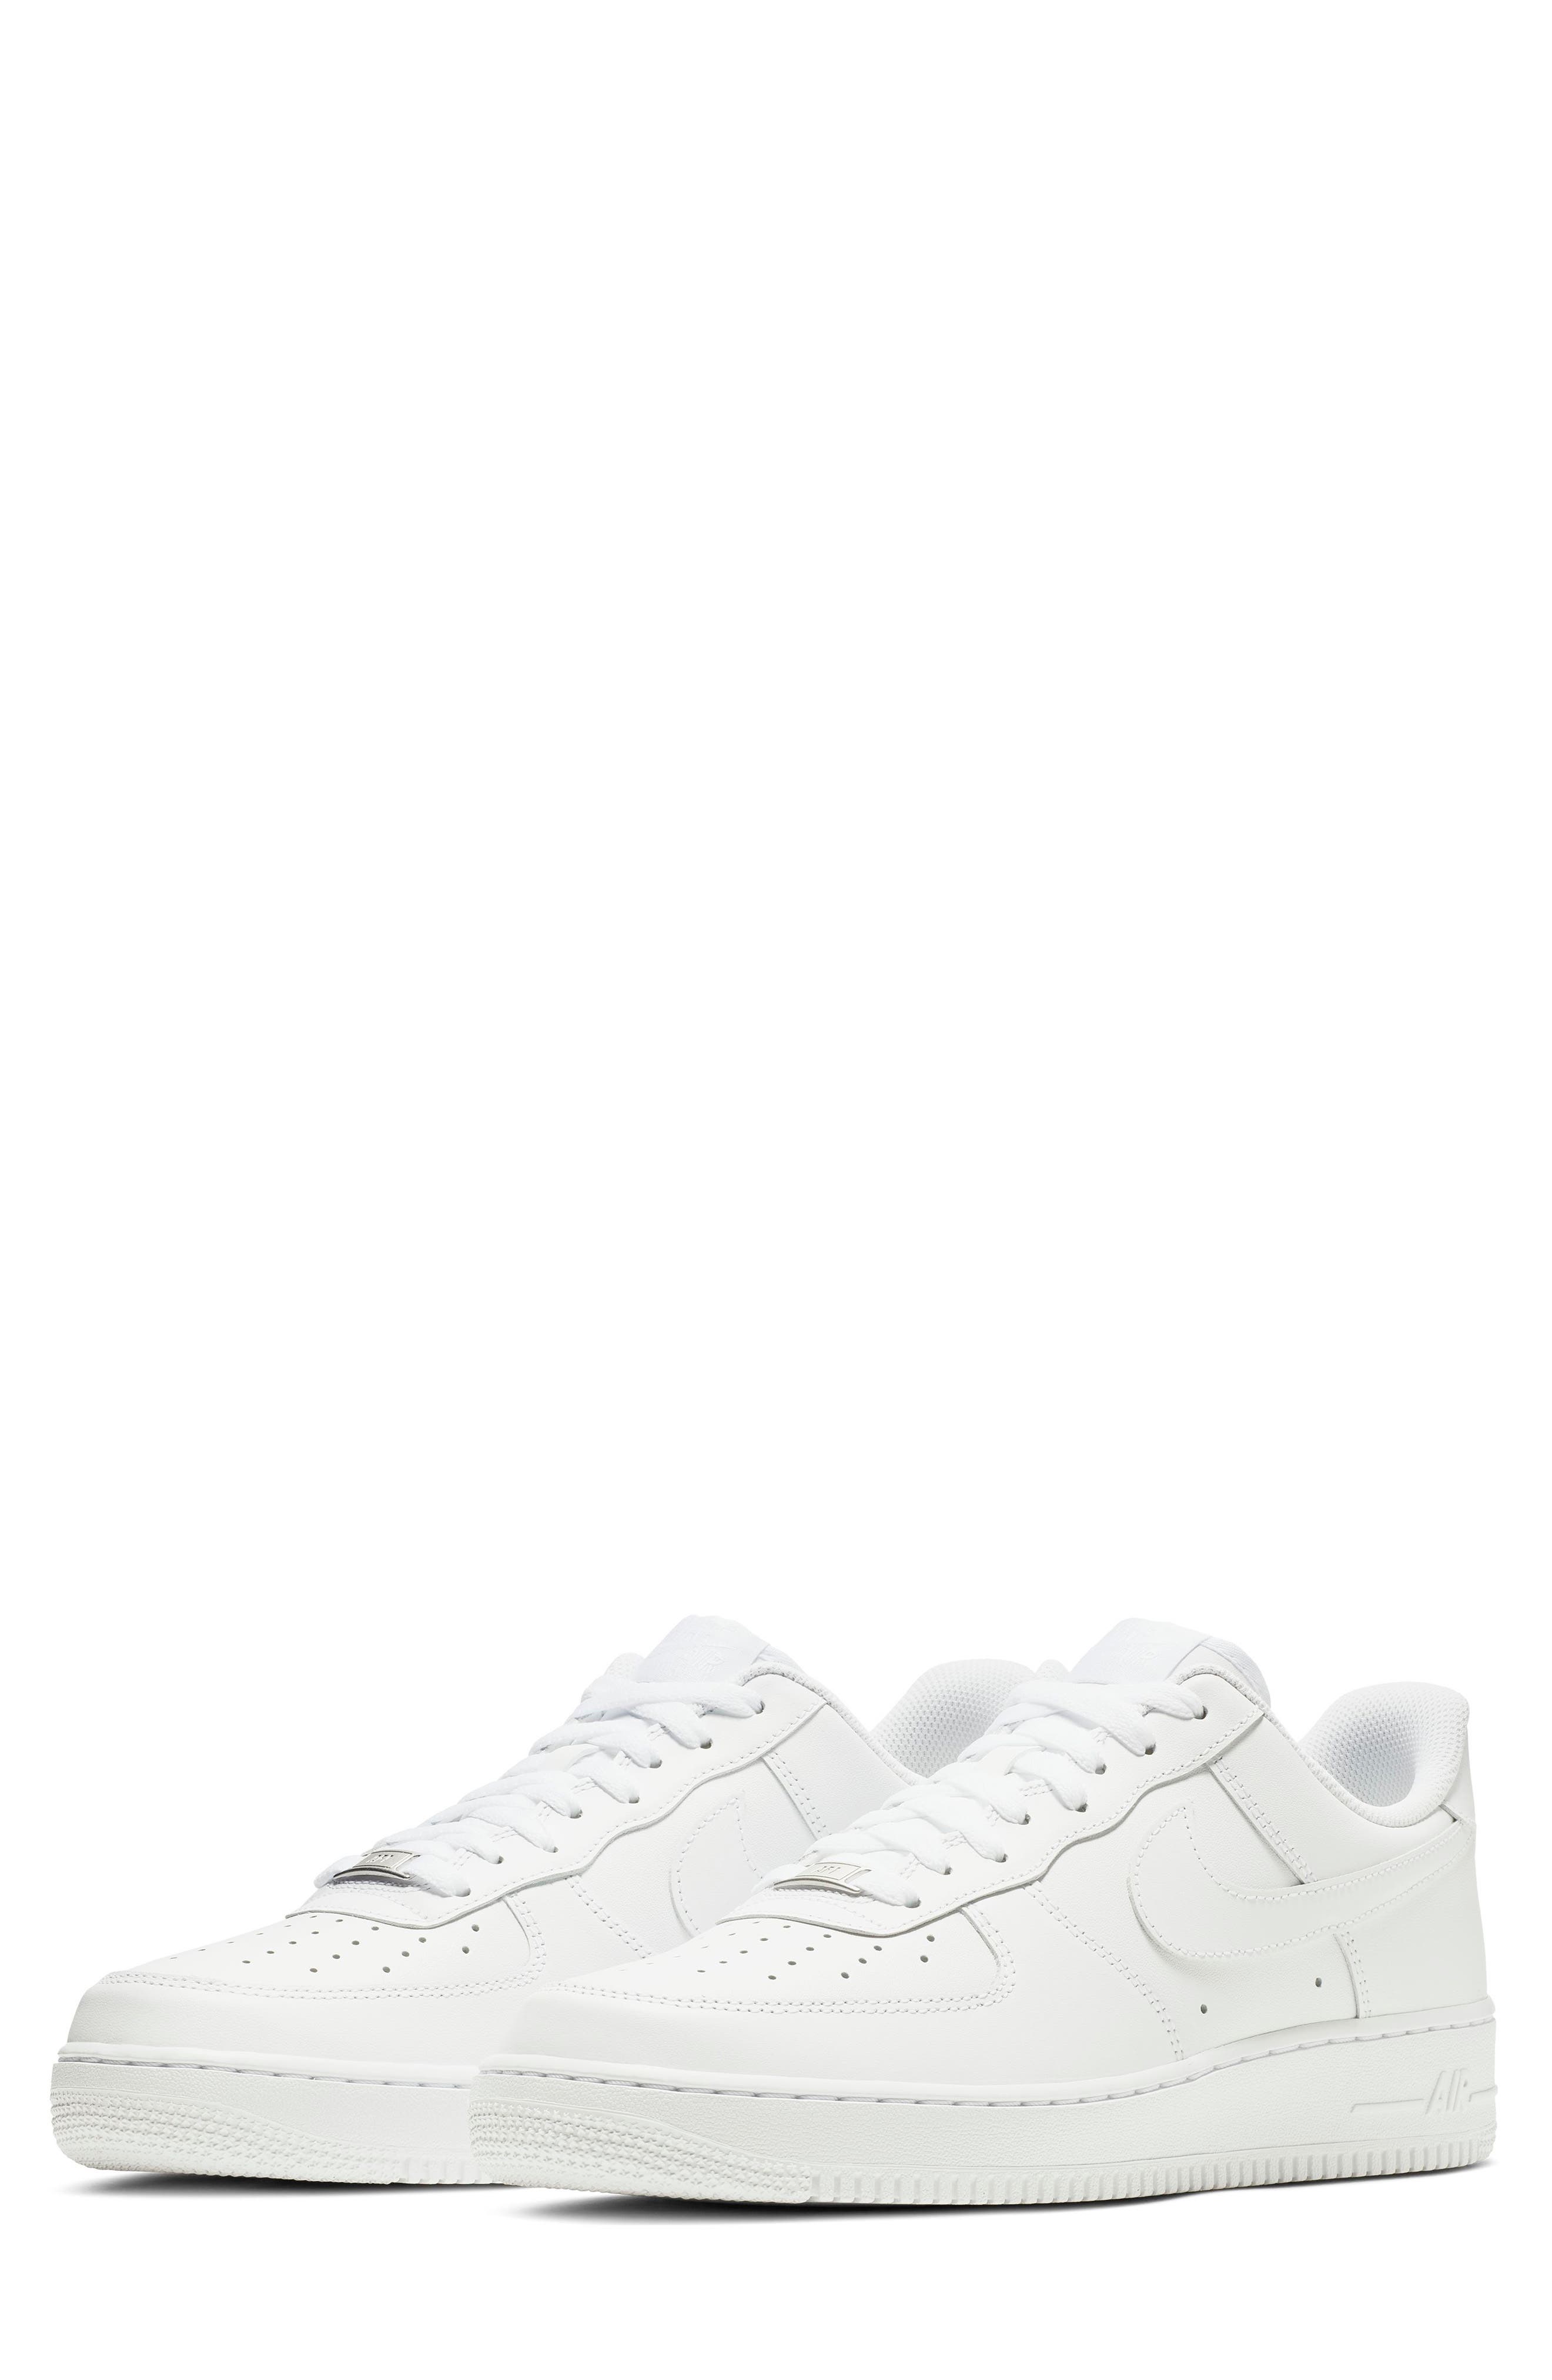 mens all white nike shoes